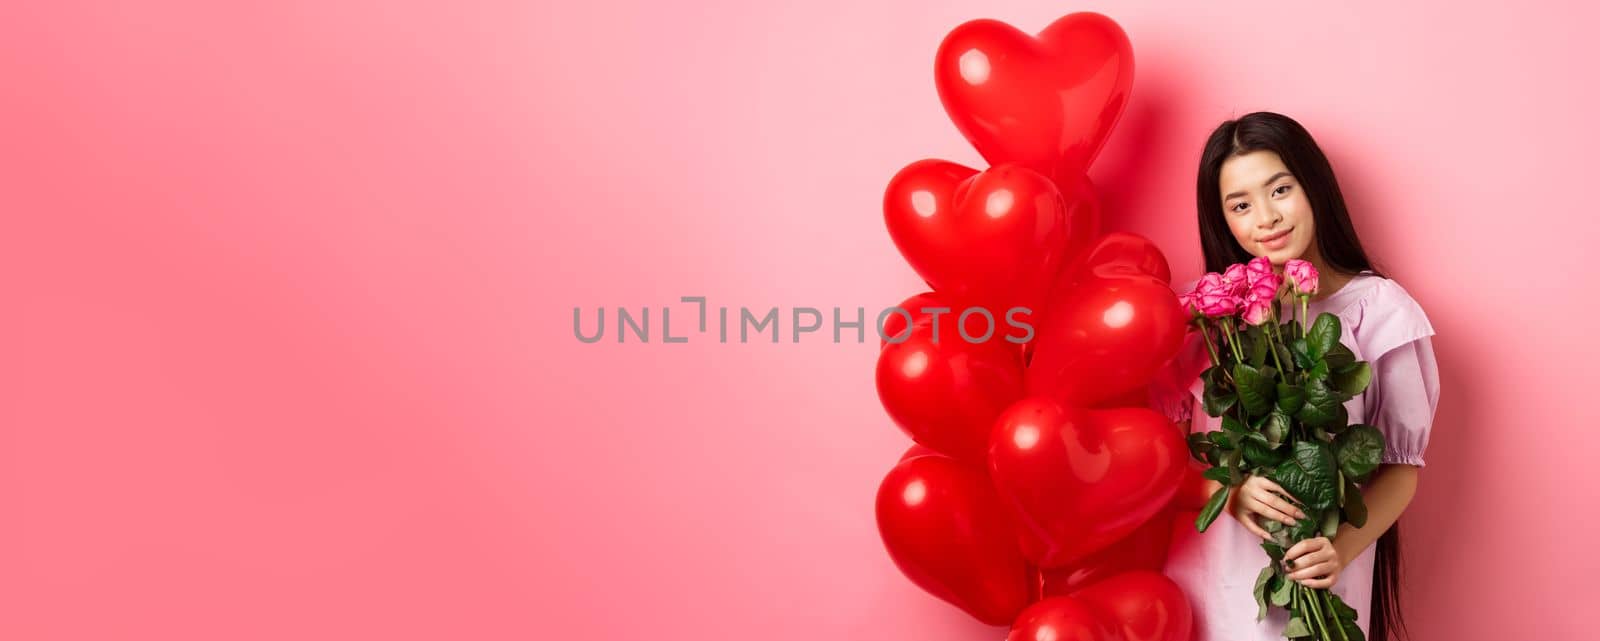 Valentines day concept. Tender and gentle teenage girl holding romantic flowers, standing near red heart balloons from lover and gazing with love, standing on pink background.